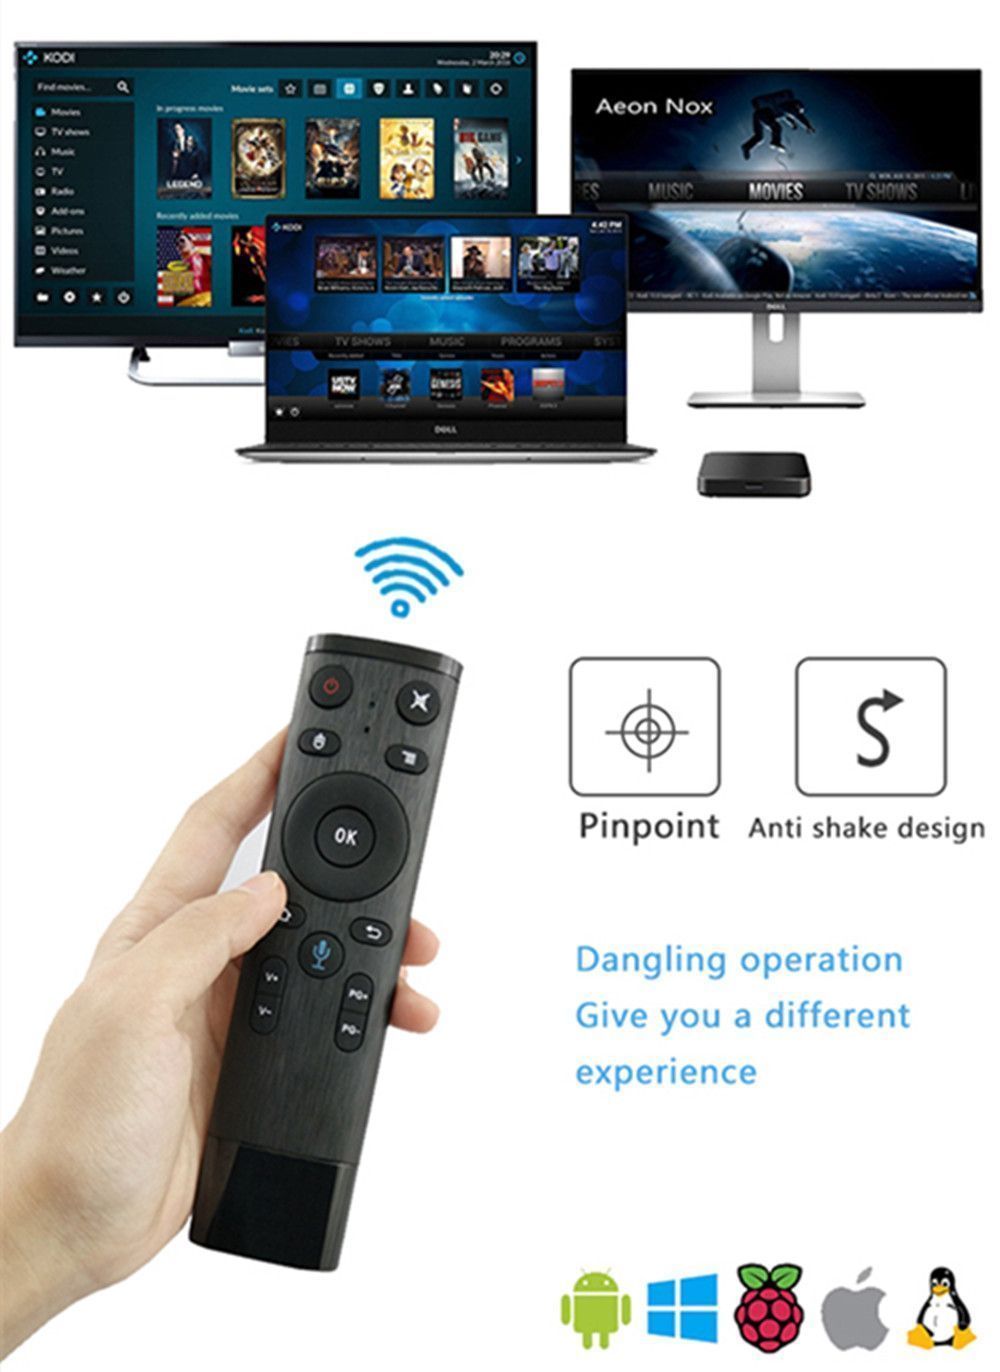 Q5-bluetooth24GHz-WIFI-Voice-Remote-Control-Air-Mouse-With-USB-Receiver-For-Smart-TV-Android-Box-1301925